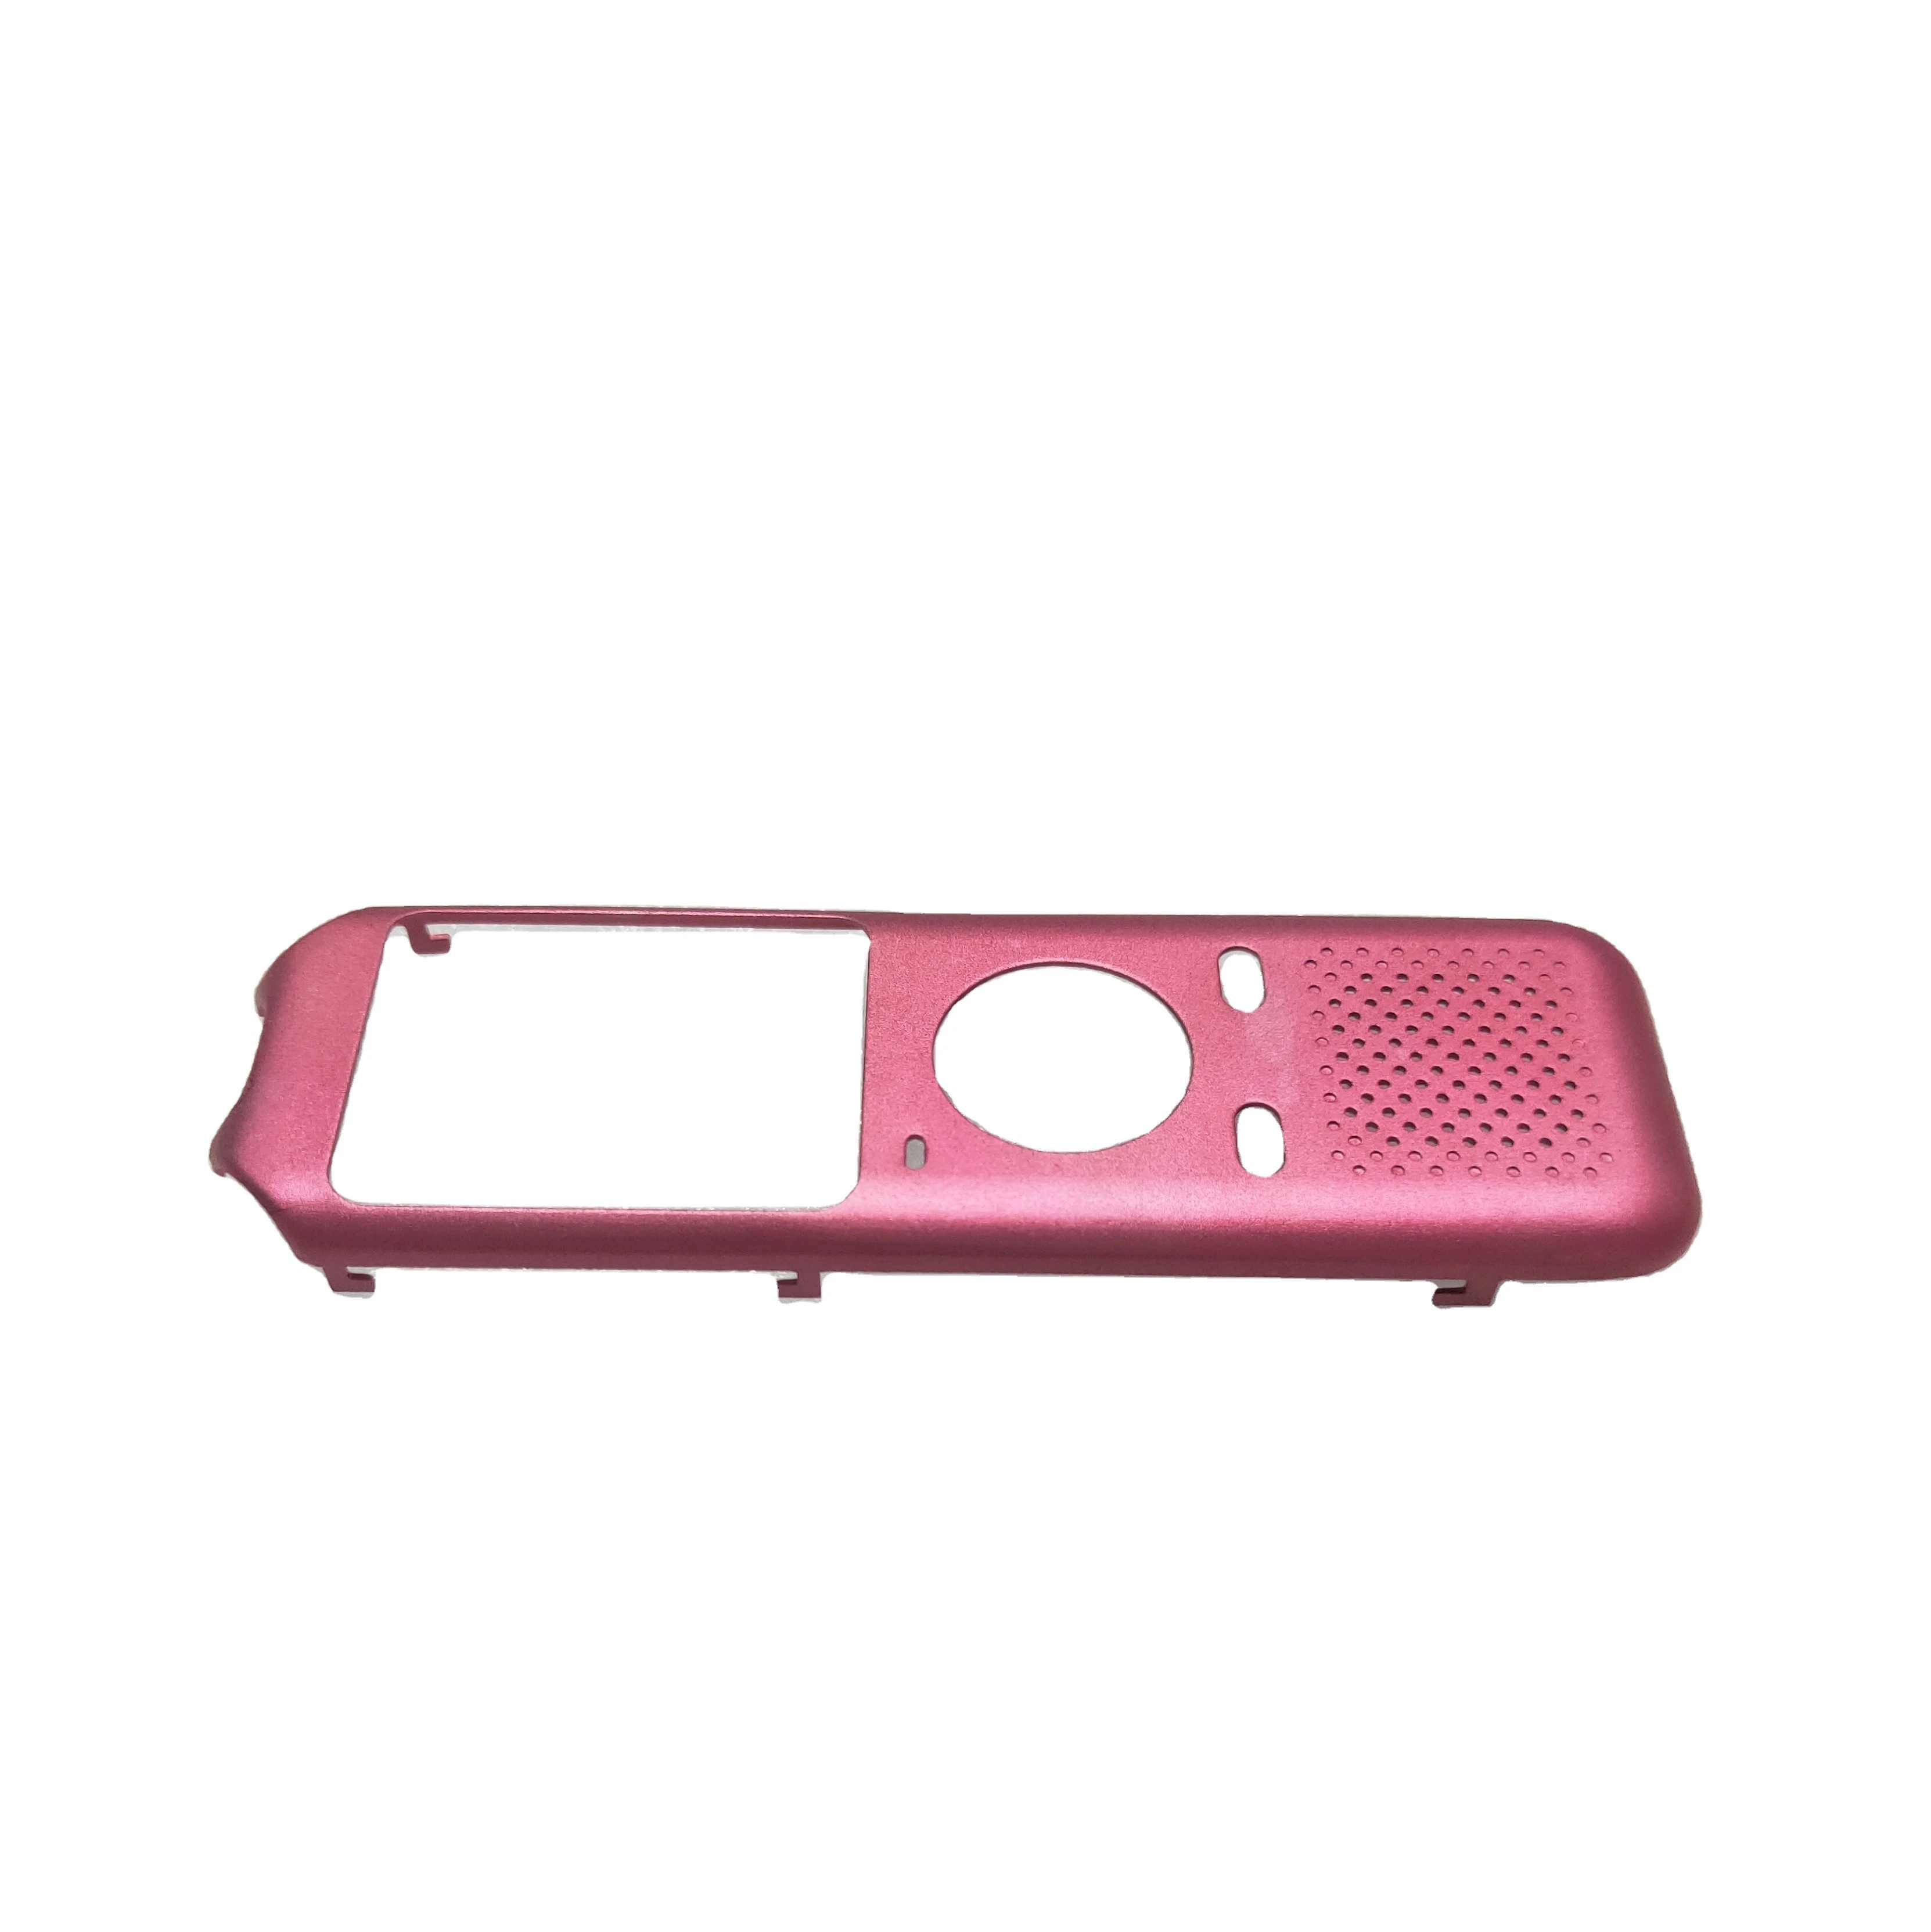 Guangdong cheap fast OEM Customized Aluminum/other metal parts processing by CNC machining after Pink Anodizing surface treatme